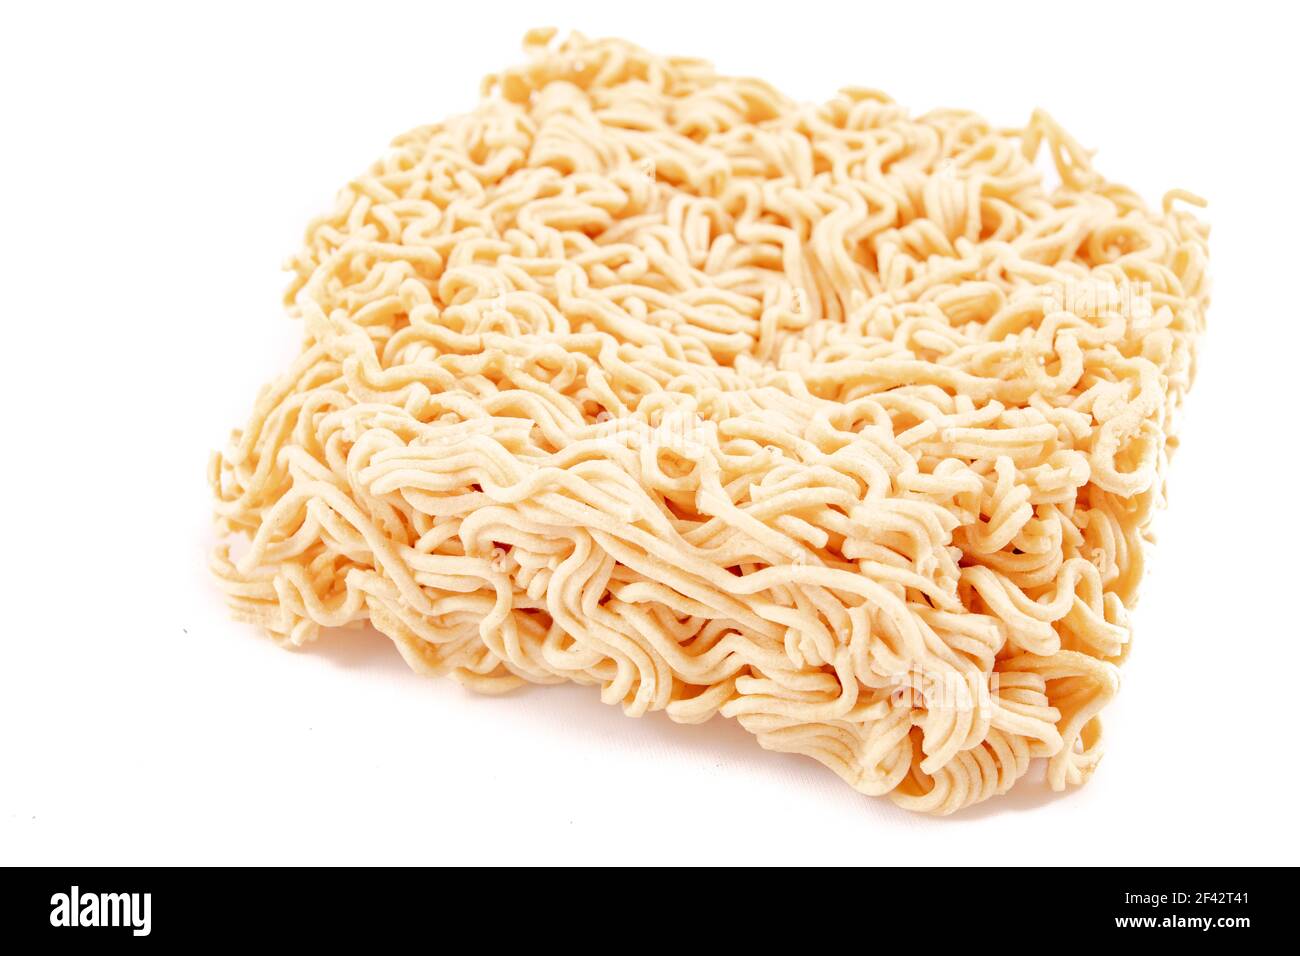 Structure of an instant noodle soup. Dry pasta used in instant dishes. Light background. Stock Photo